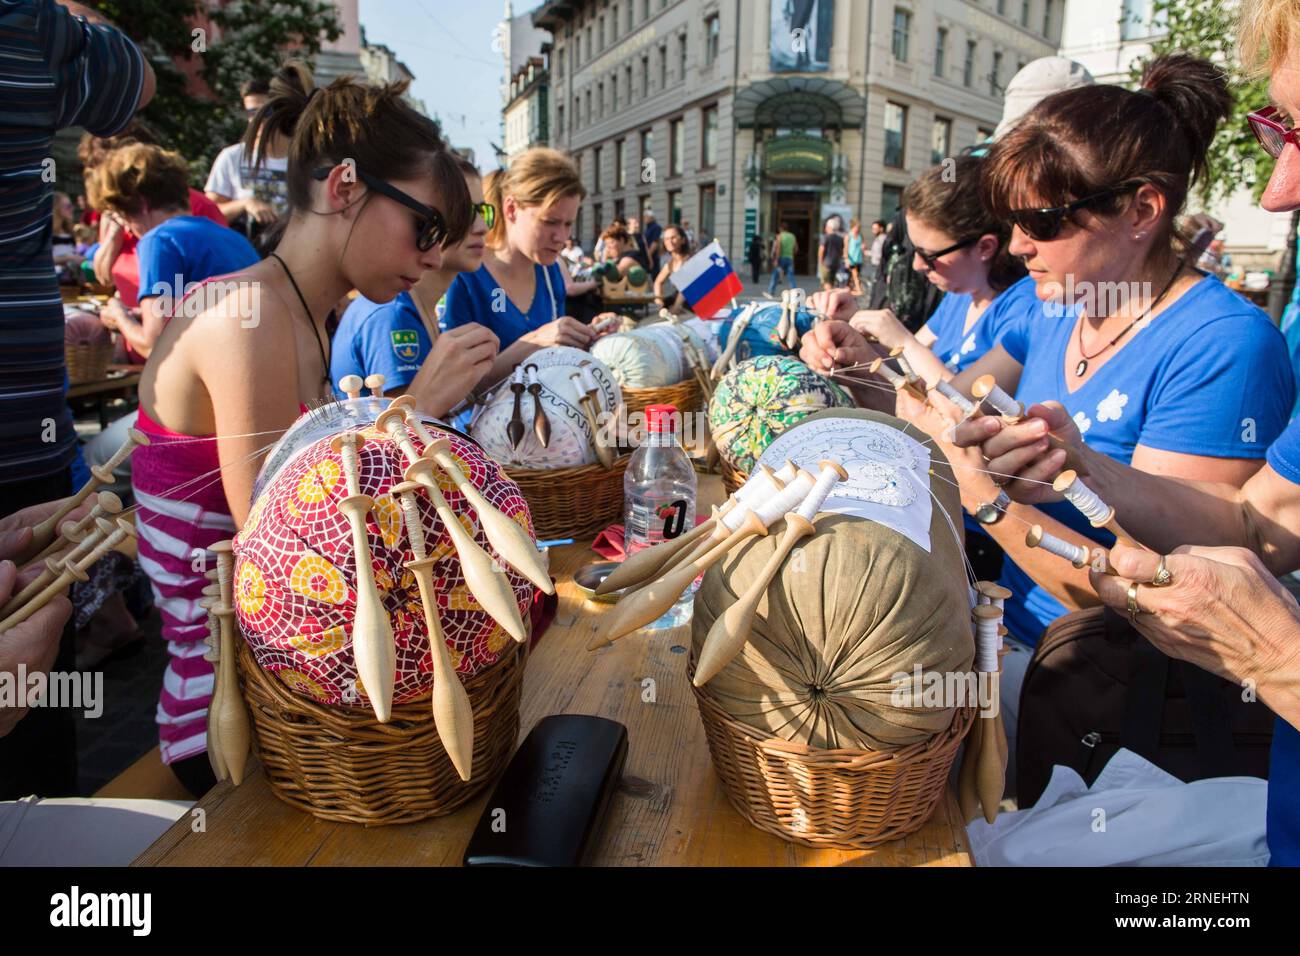 LJUBLJANA, June 23, 2016 -- Women make lace during a lacemaking event marking the beginning of the 17th OIDFA (international lace organization) World Lace Congress and General Assembly in Ljubljana, Slovenia, June 23, 2016. Nearly a thousand lace makers from all over the world attended the event on Friday.) (yy) SLOVENIA-LJUBLJANA-LACEMAKING LukaxDakskobler PUBLICATIONxNOTxINxCHN   Ljubljana June 23 2016 Women Make Lace during a lacemaking Event marking The BEGINNING of The 17th  International Lace Organization World Lace Congress and General Assembly in Ljubljana Slovenia June 23 2016 parishi Stock Photo